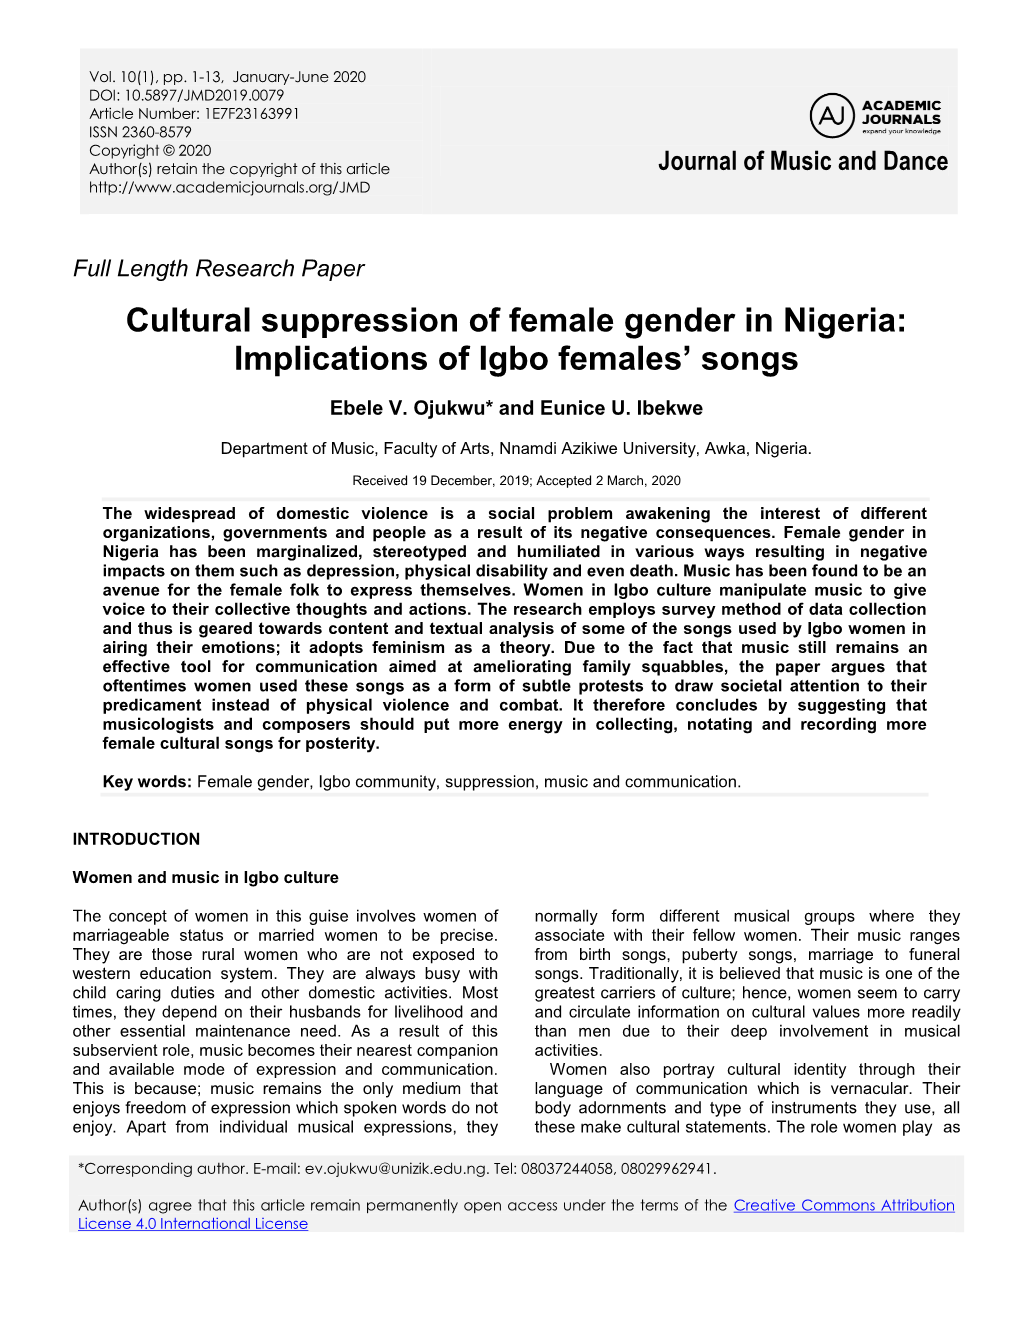 Cultural Suppression of Female Gender in Nigeria: Implications of Igbo Females’ Songs